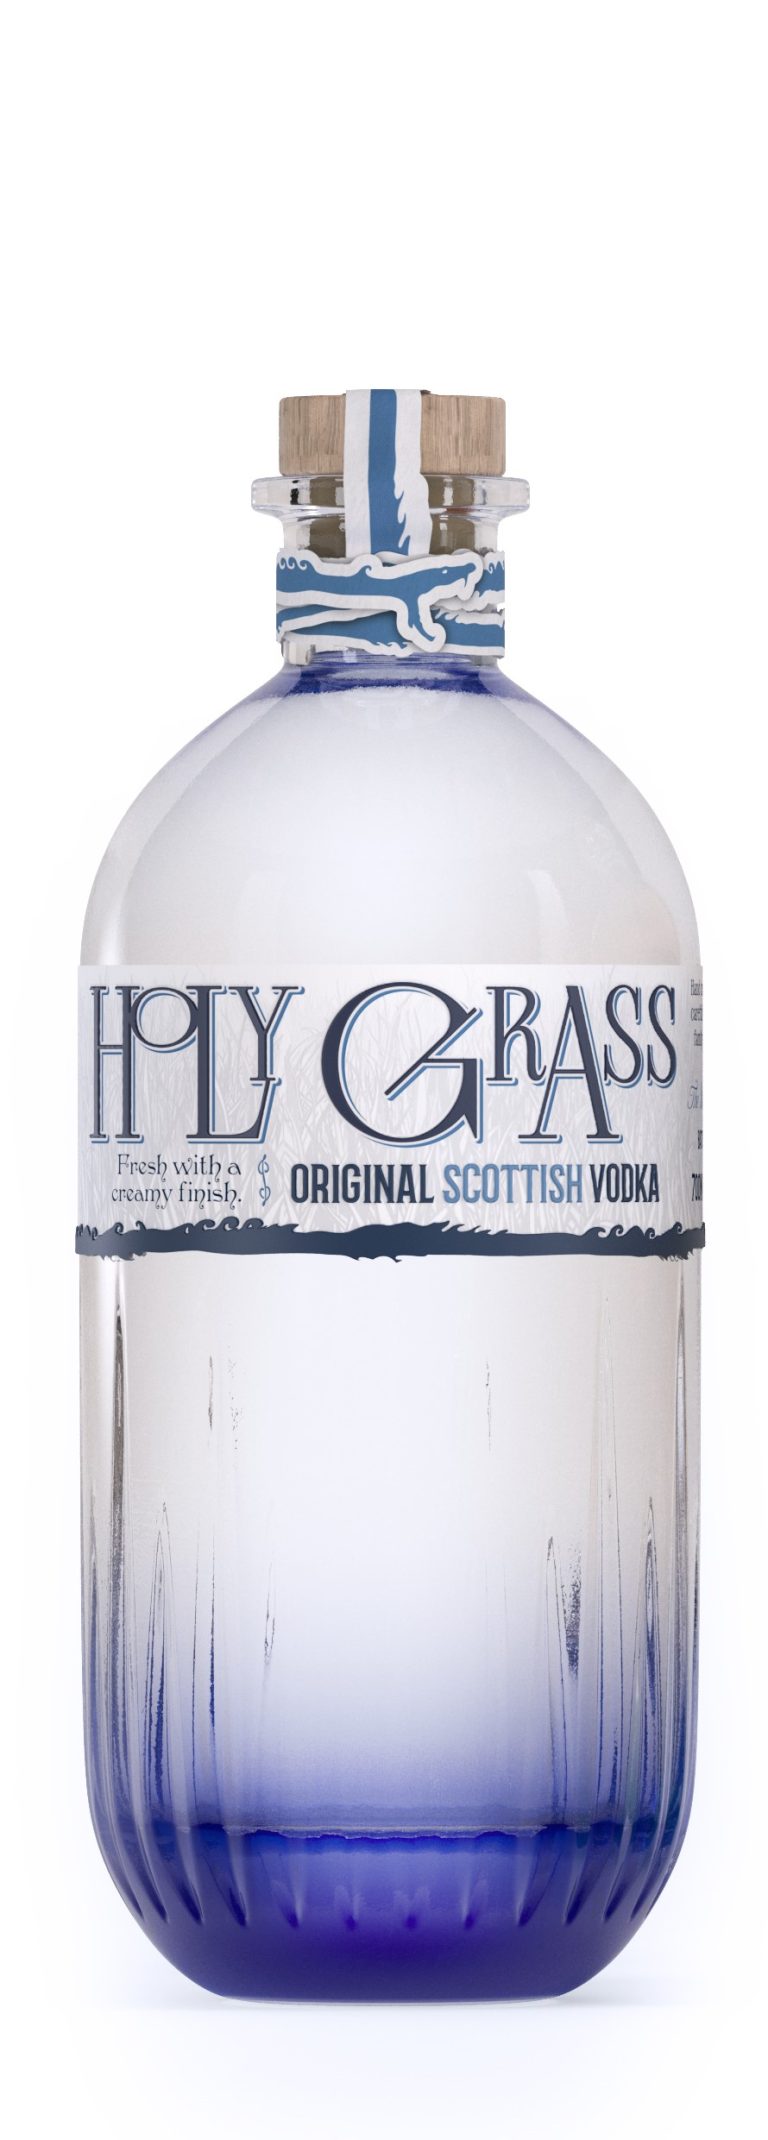 Dunnet Bay Distillery launches new bottle, packaging for Holy Grass Vodka